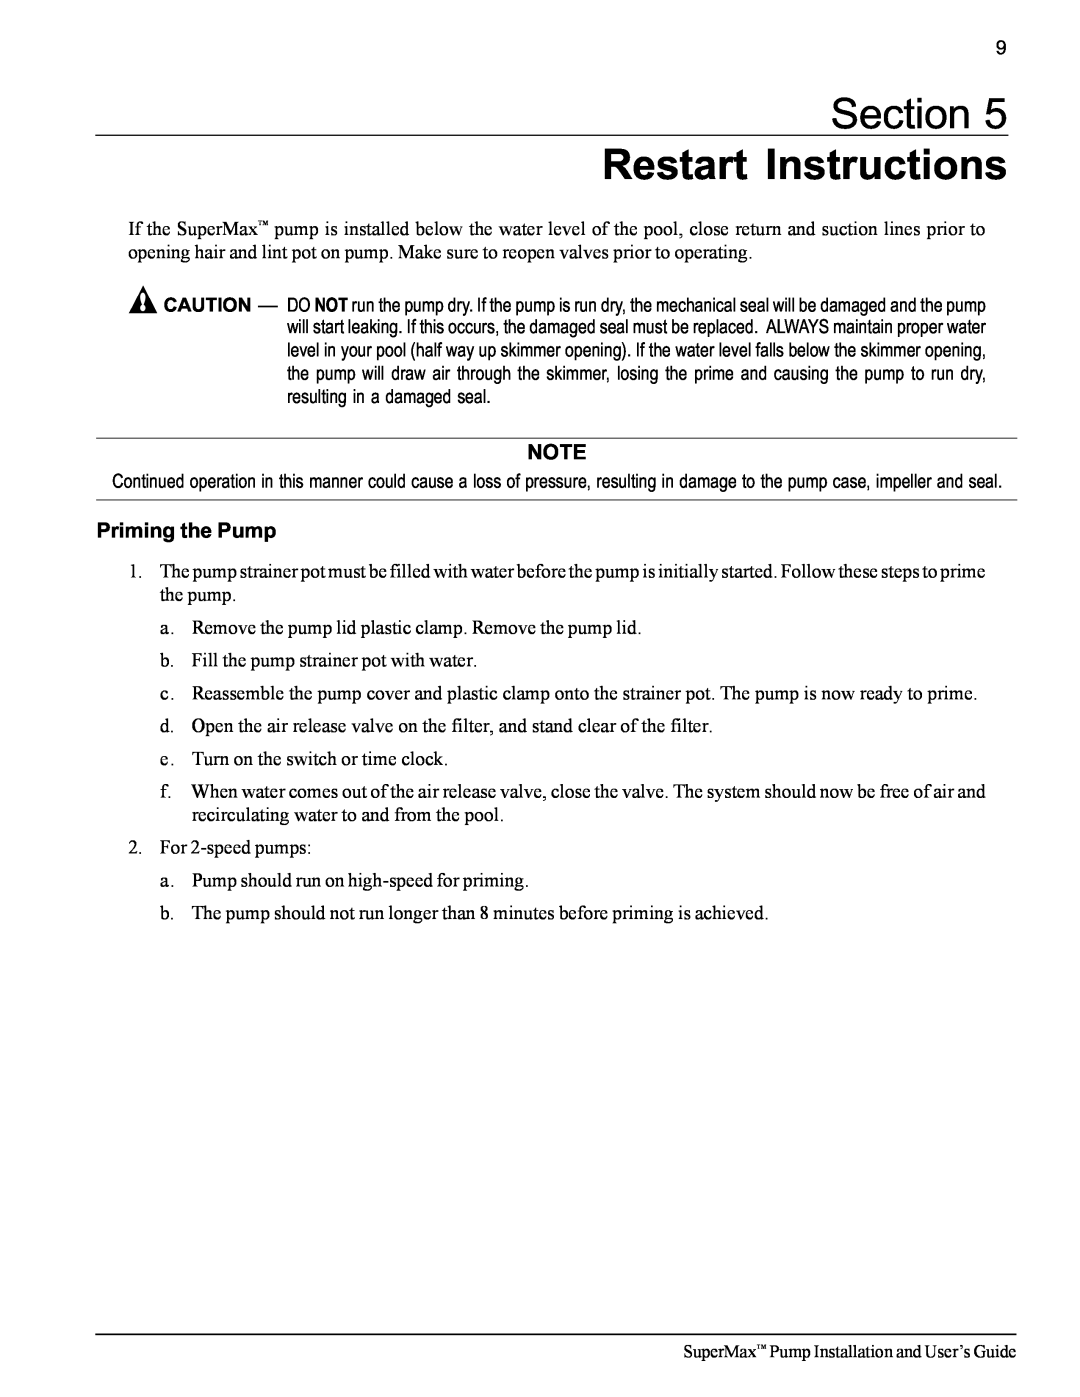 Pentair SuperMax important safety instructions Section Restart Instructions, Priming the Pump 